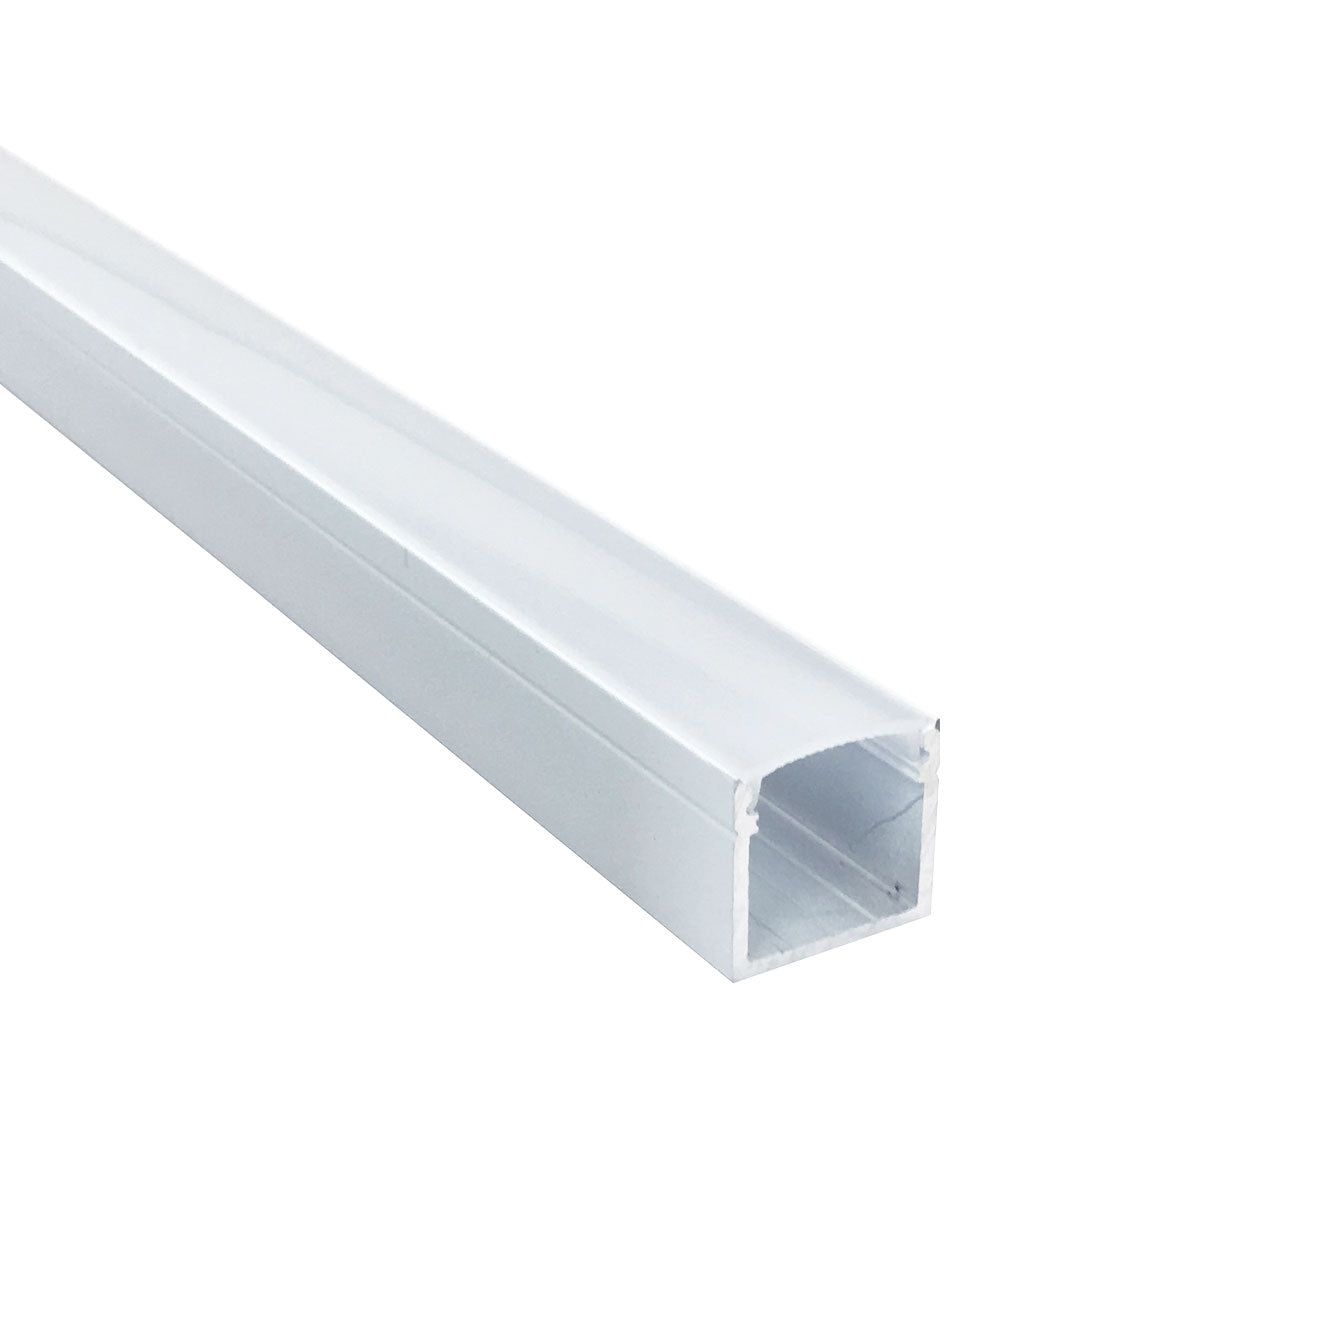 Nora Lighting NATL-C26W 4-ft Deep Channel (Plastic Diffuser and End Caps Included) - White